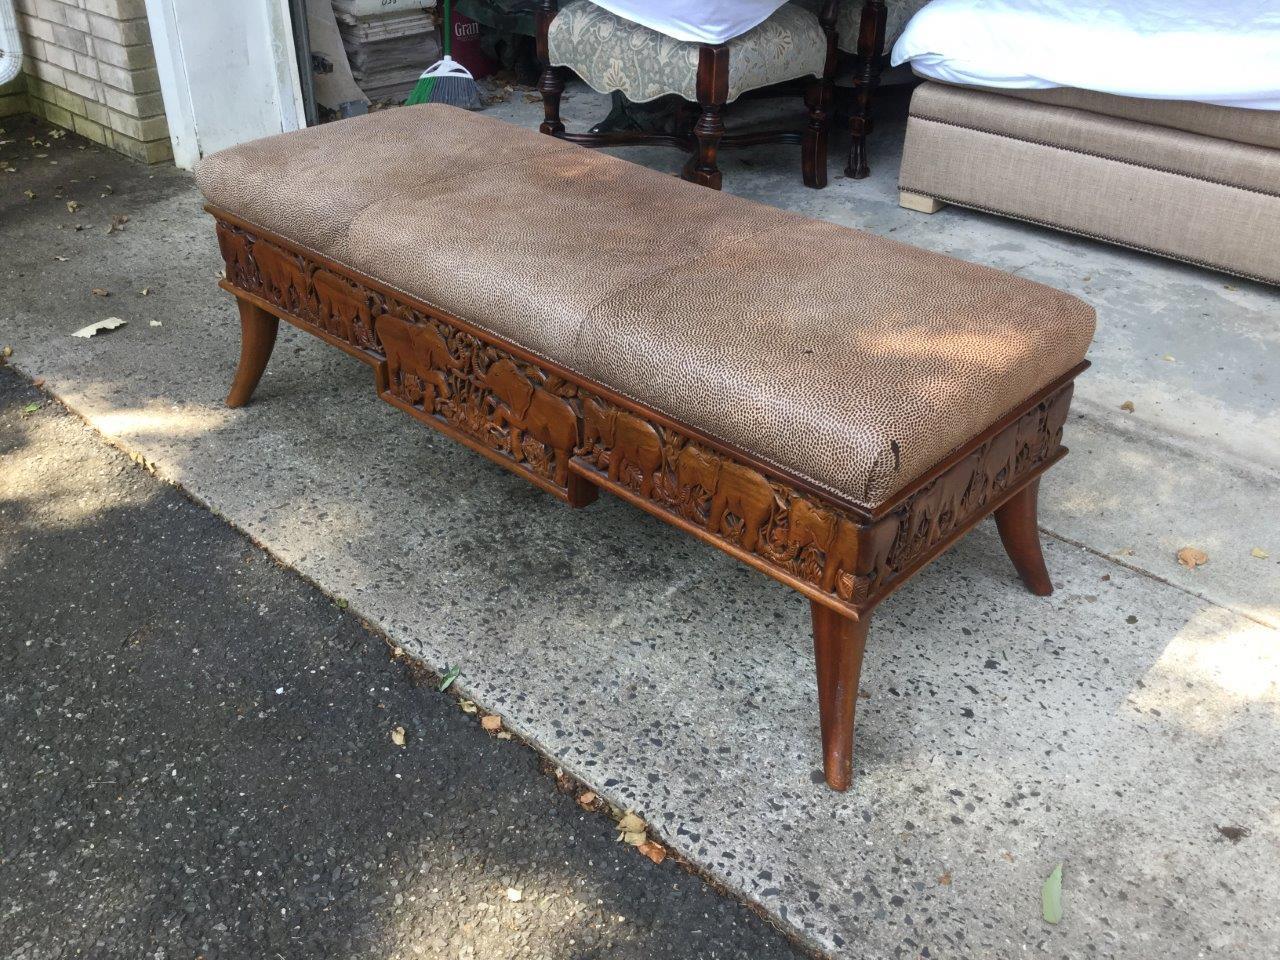 Handsome African tribal theme carved wood rectangular bench featuring elephants on all four sides. Long and wide, this bench can be used for extra seating, or as a coffee table in front of a sofa. The upholstery is printed leather which imitates an